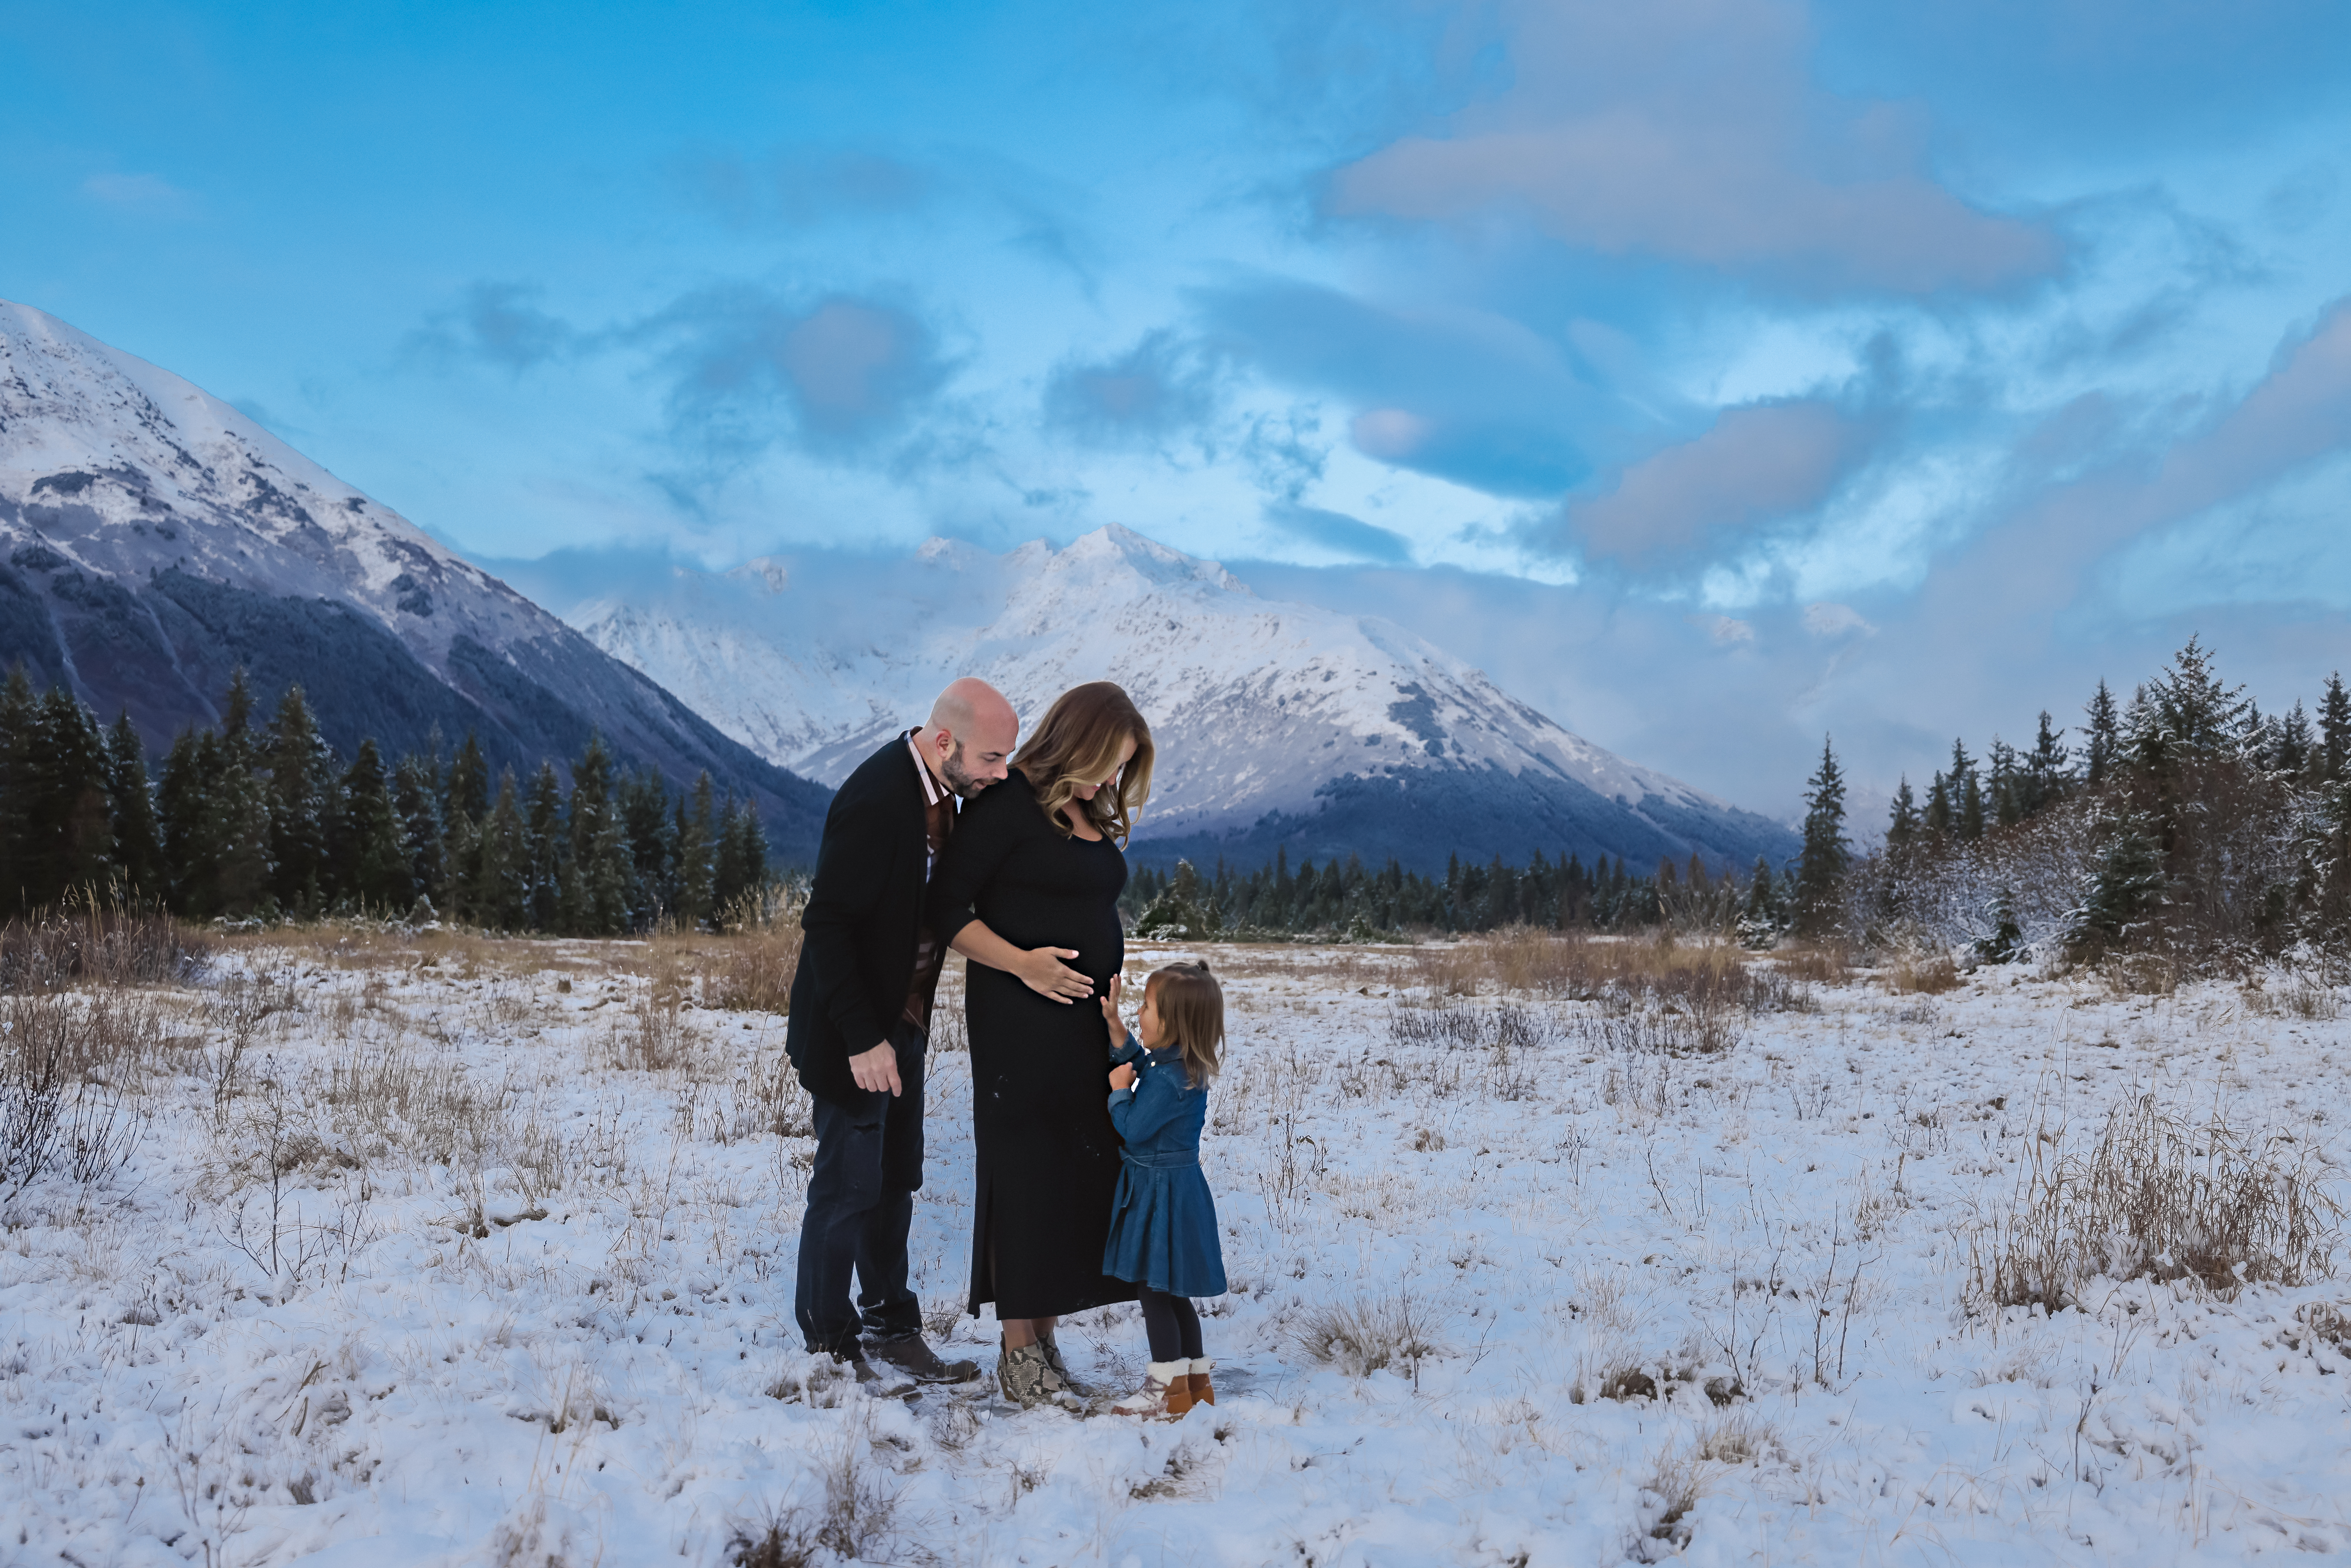 Dale and Tyler Benfield Announce 2nd Pregnancy in Alaska